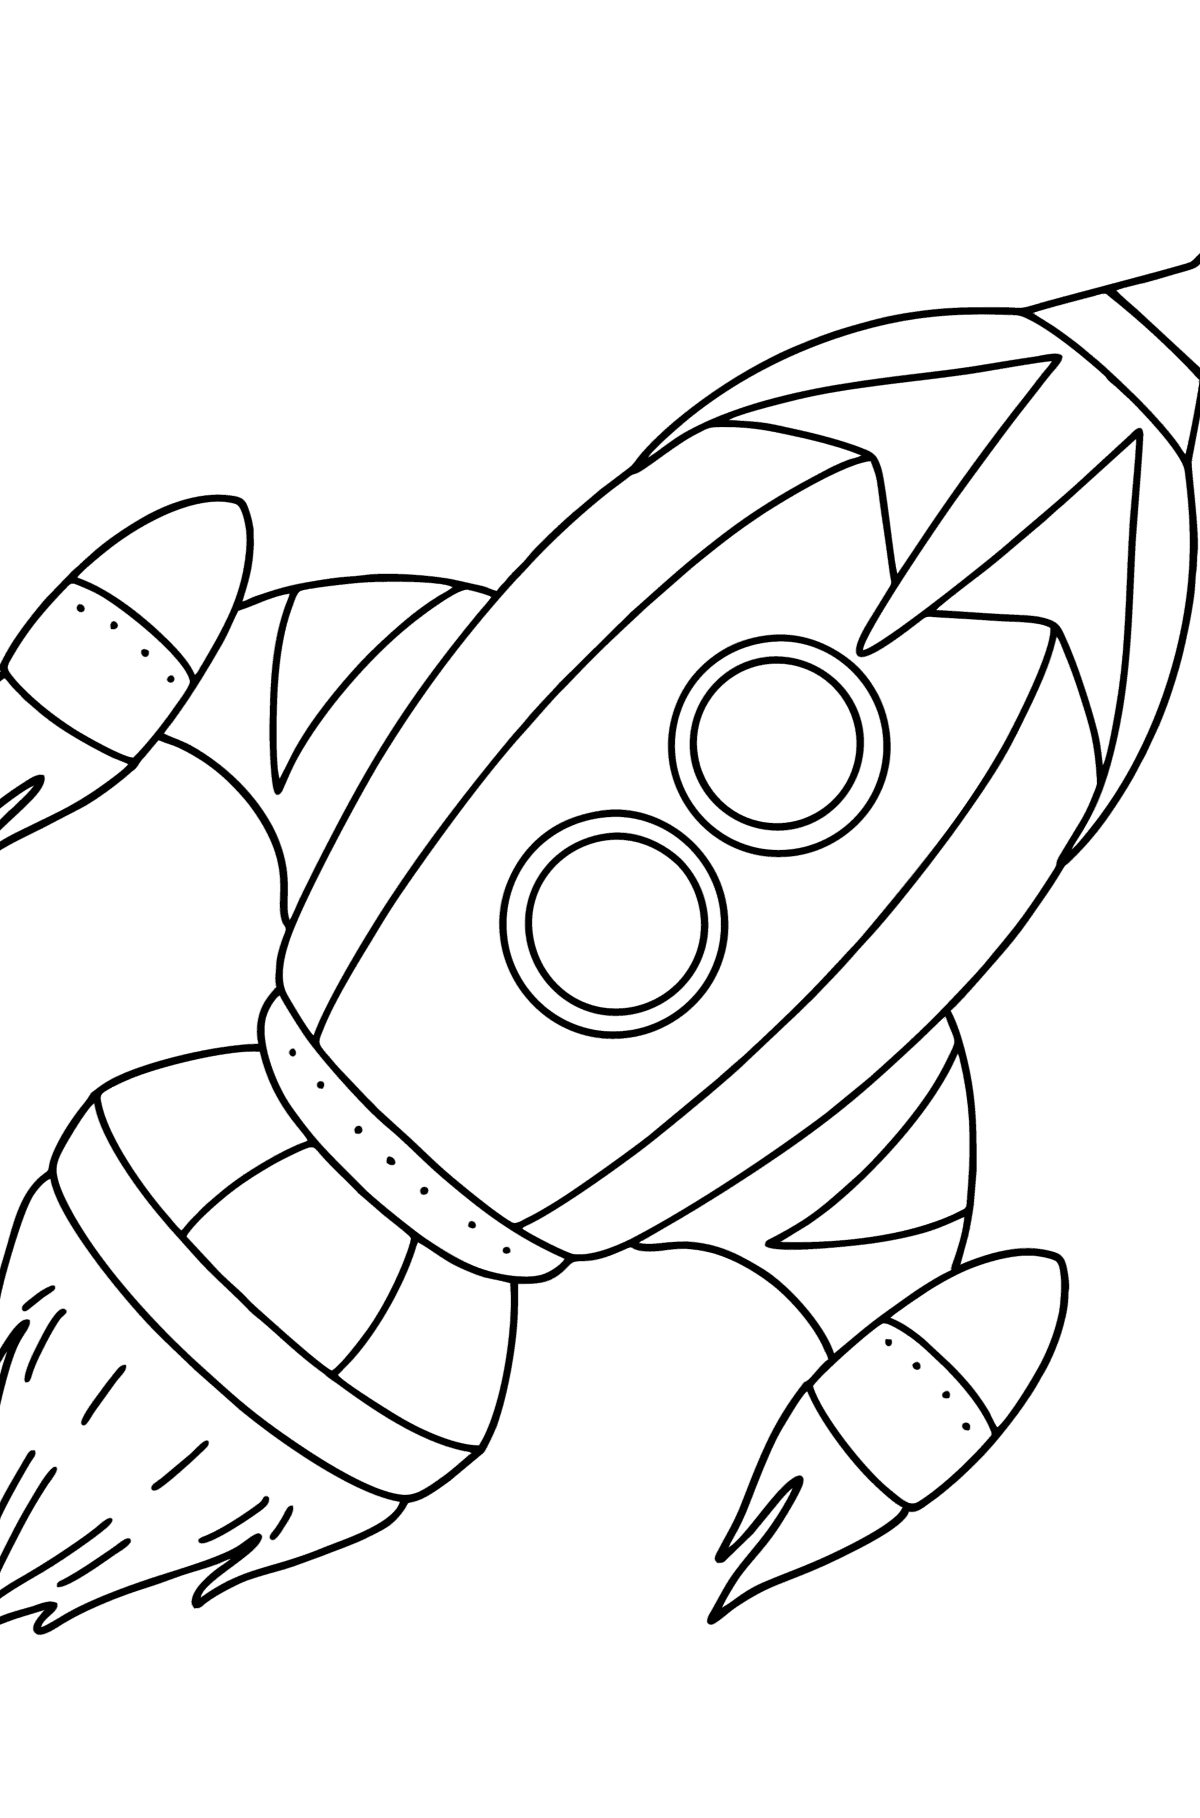 Cartoon rocket coloring page - Coloring Pages for Kids